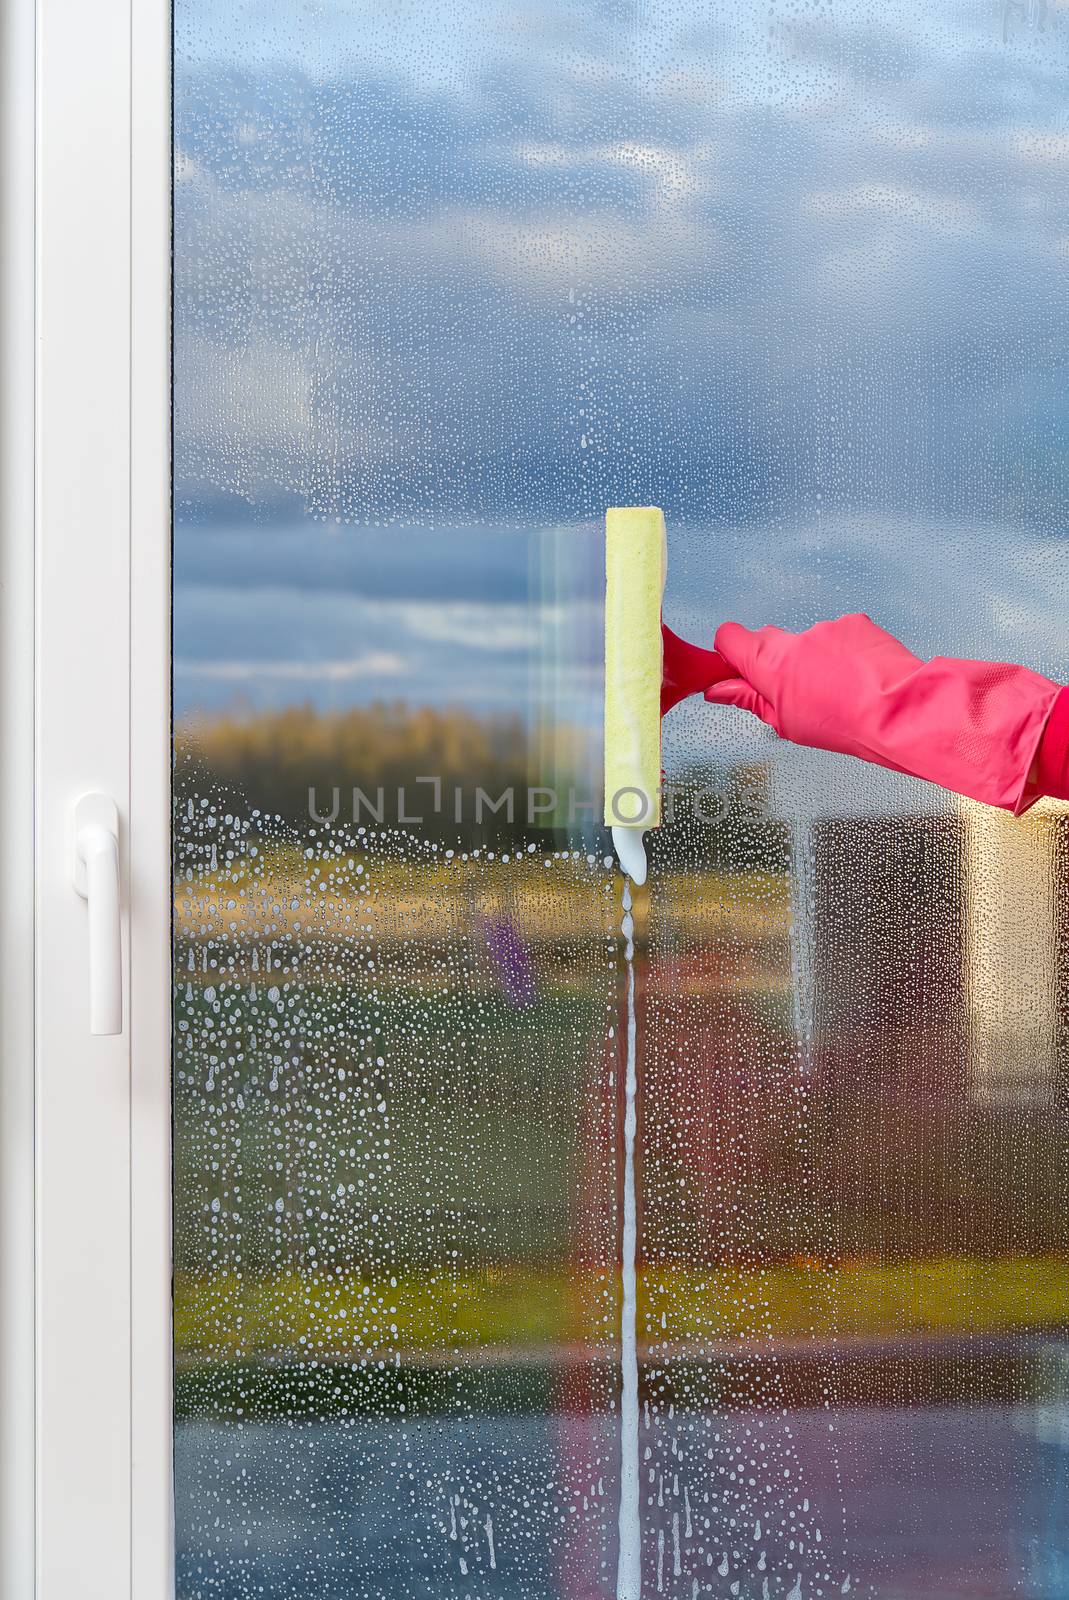 attractive wife washing a window. Gloved hand cleaning window rag and spray. washing windows. cleaning service concept. by PhotoTime